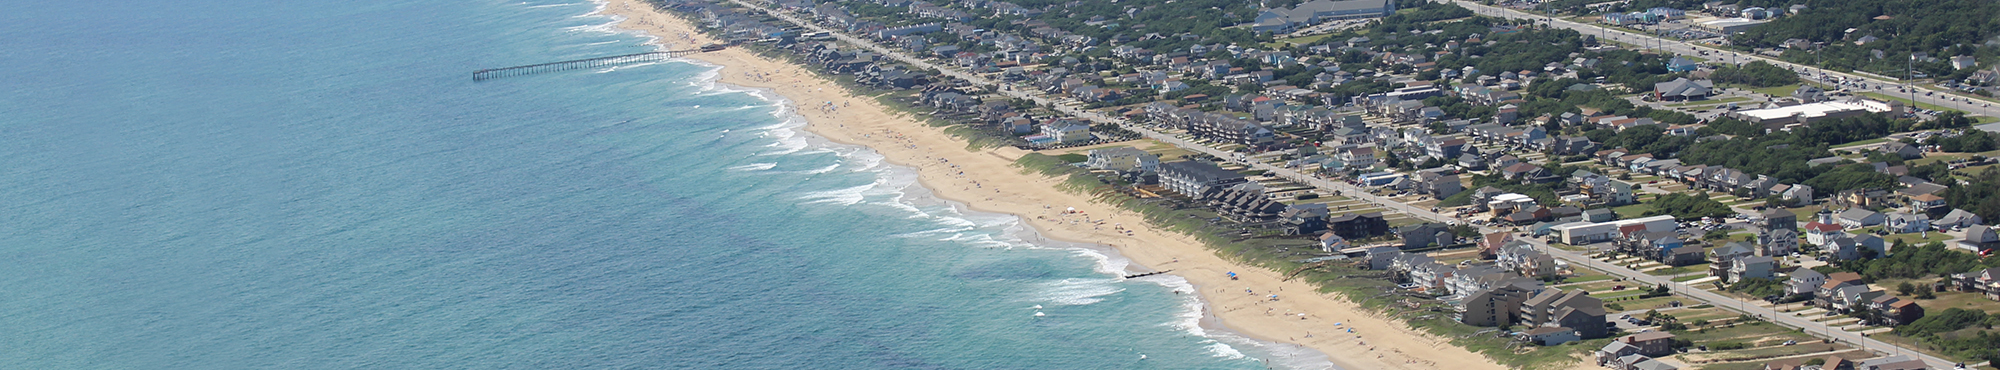 Things to Do in the Outer Banks